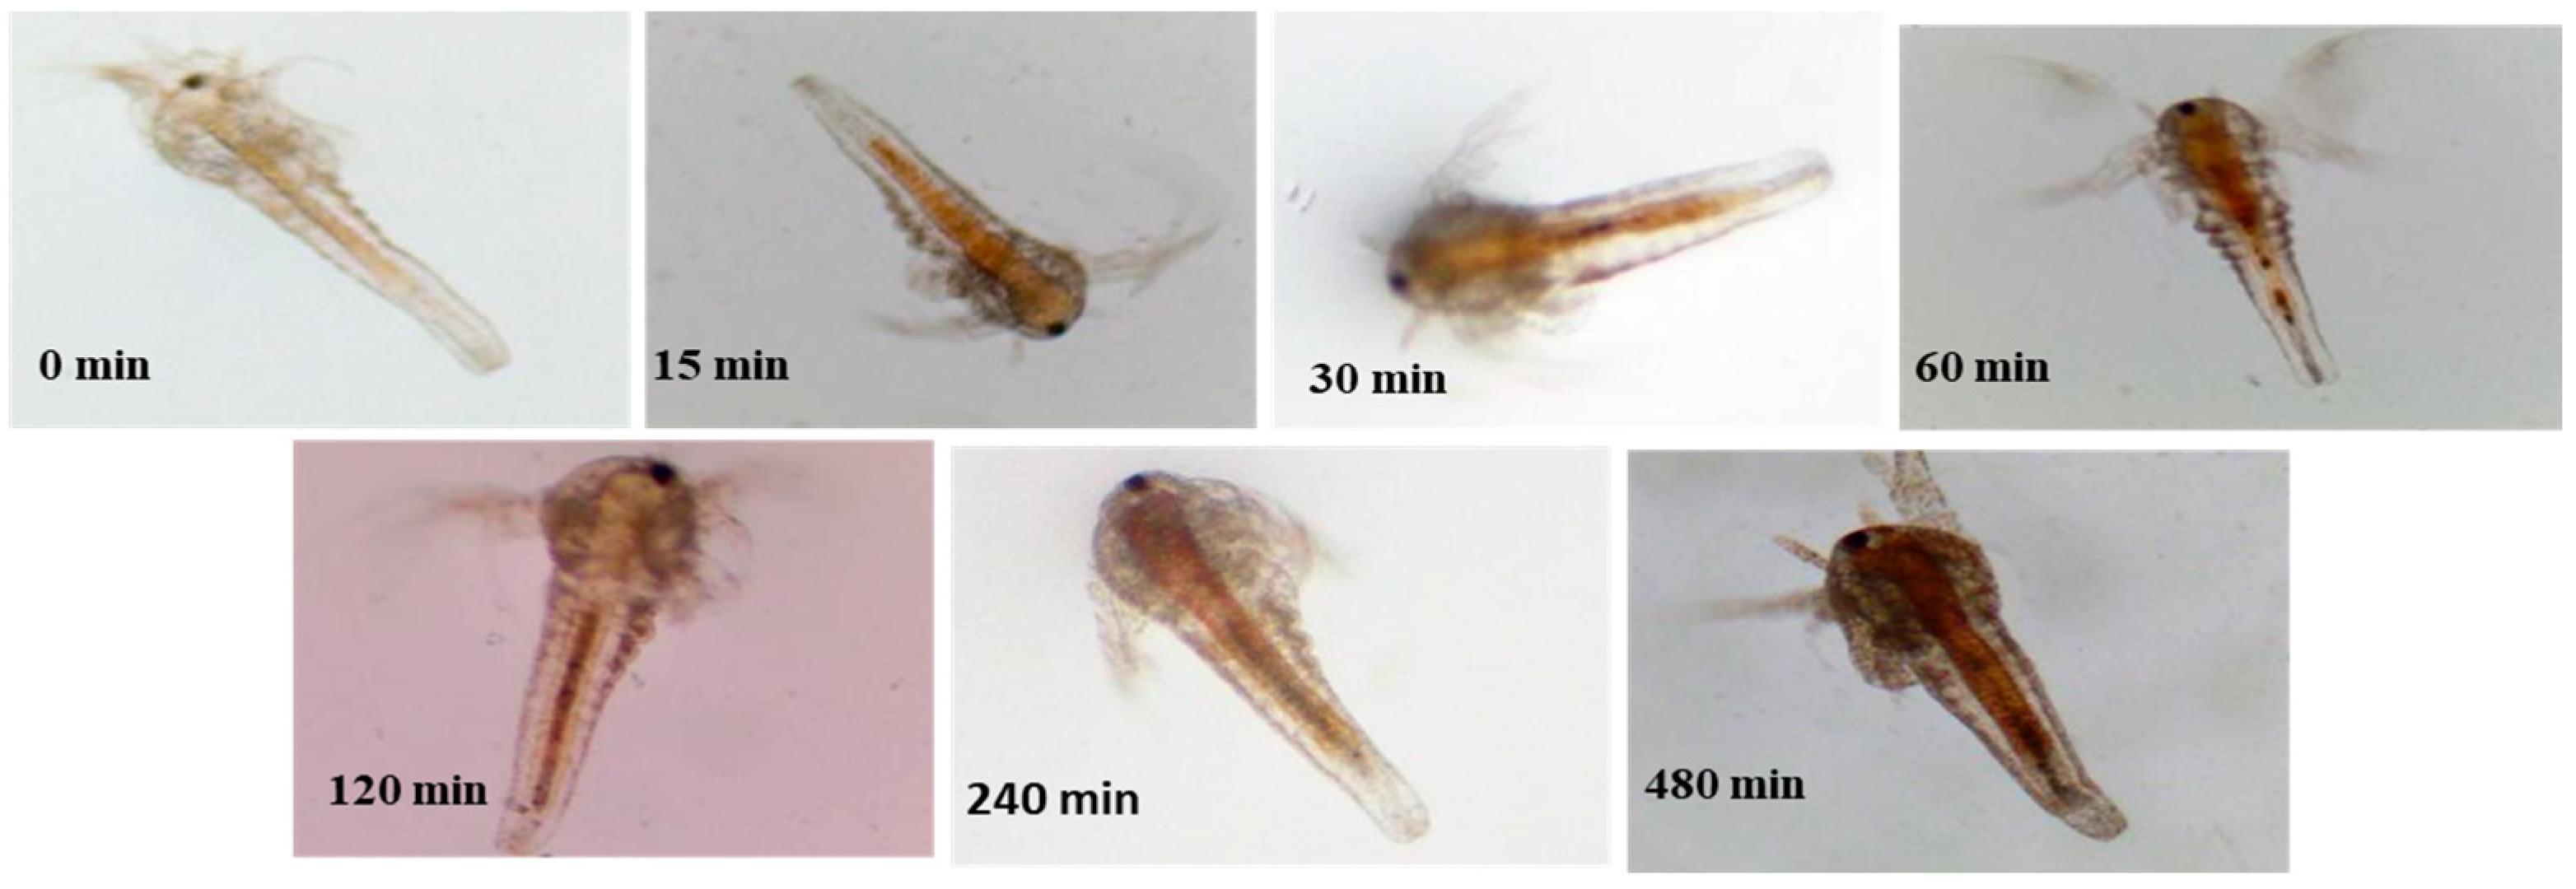 Artemia: A Model Specimen for Educational Microscopy Projects in